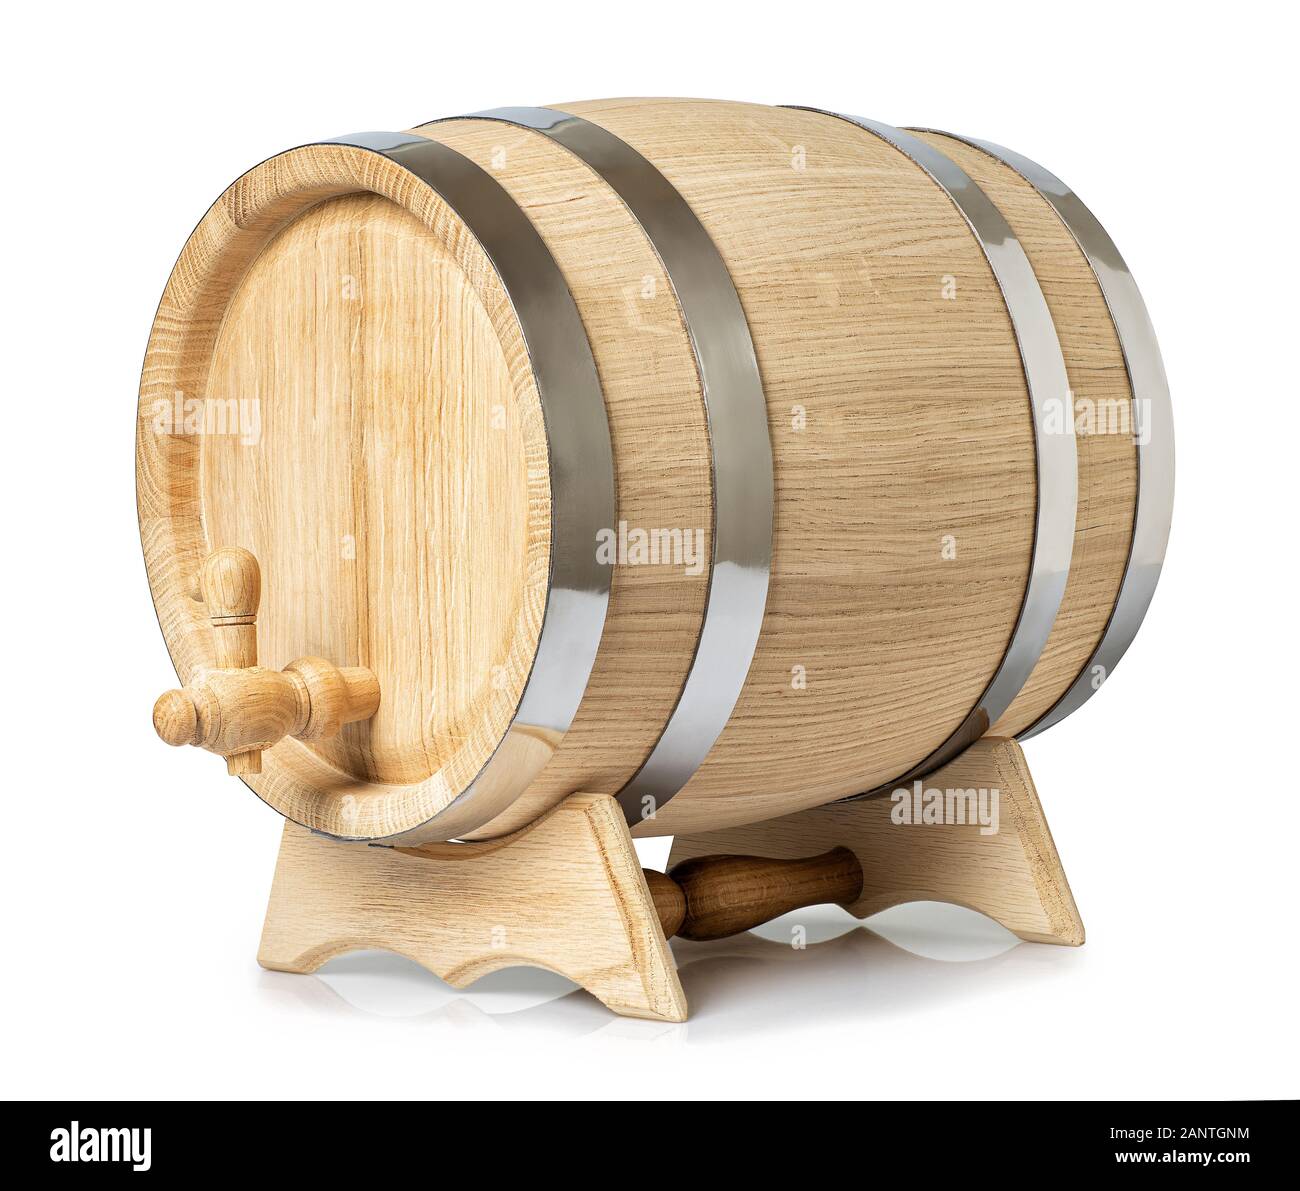 new wooden barrel for alcohol drinks with stopcock isolated on white background Stock Photo